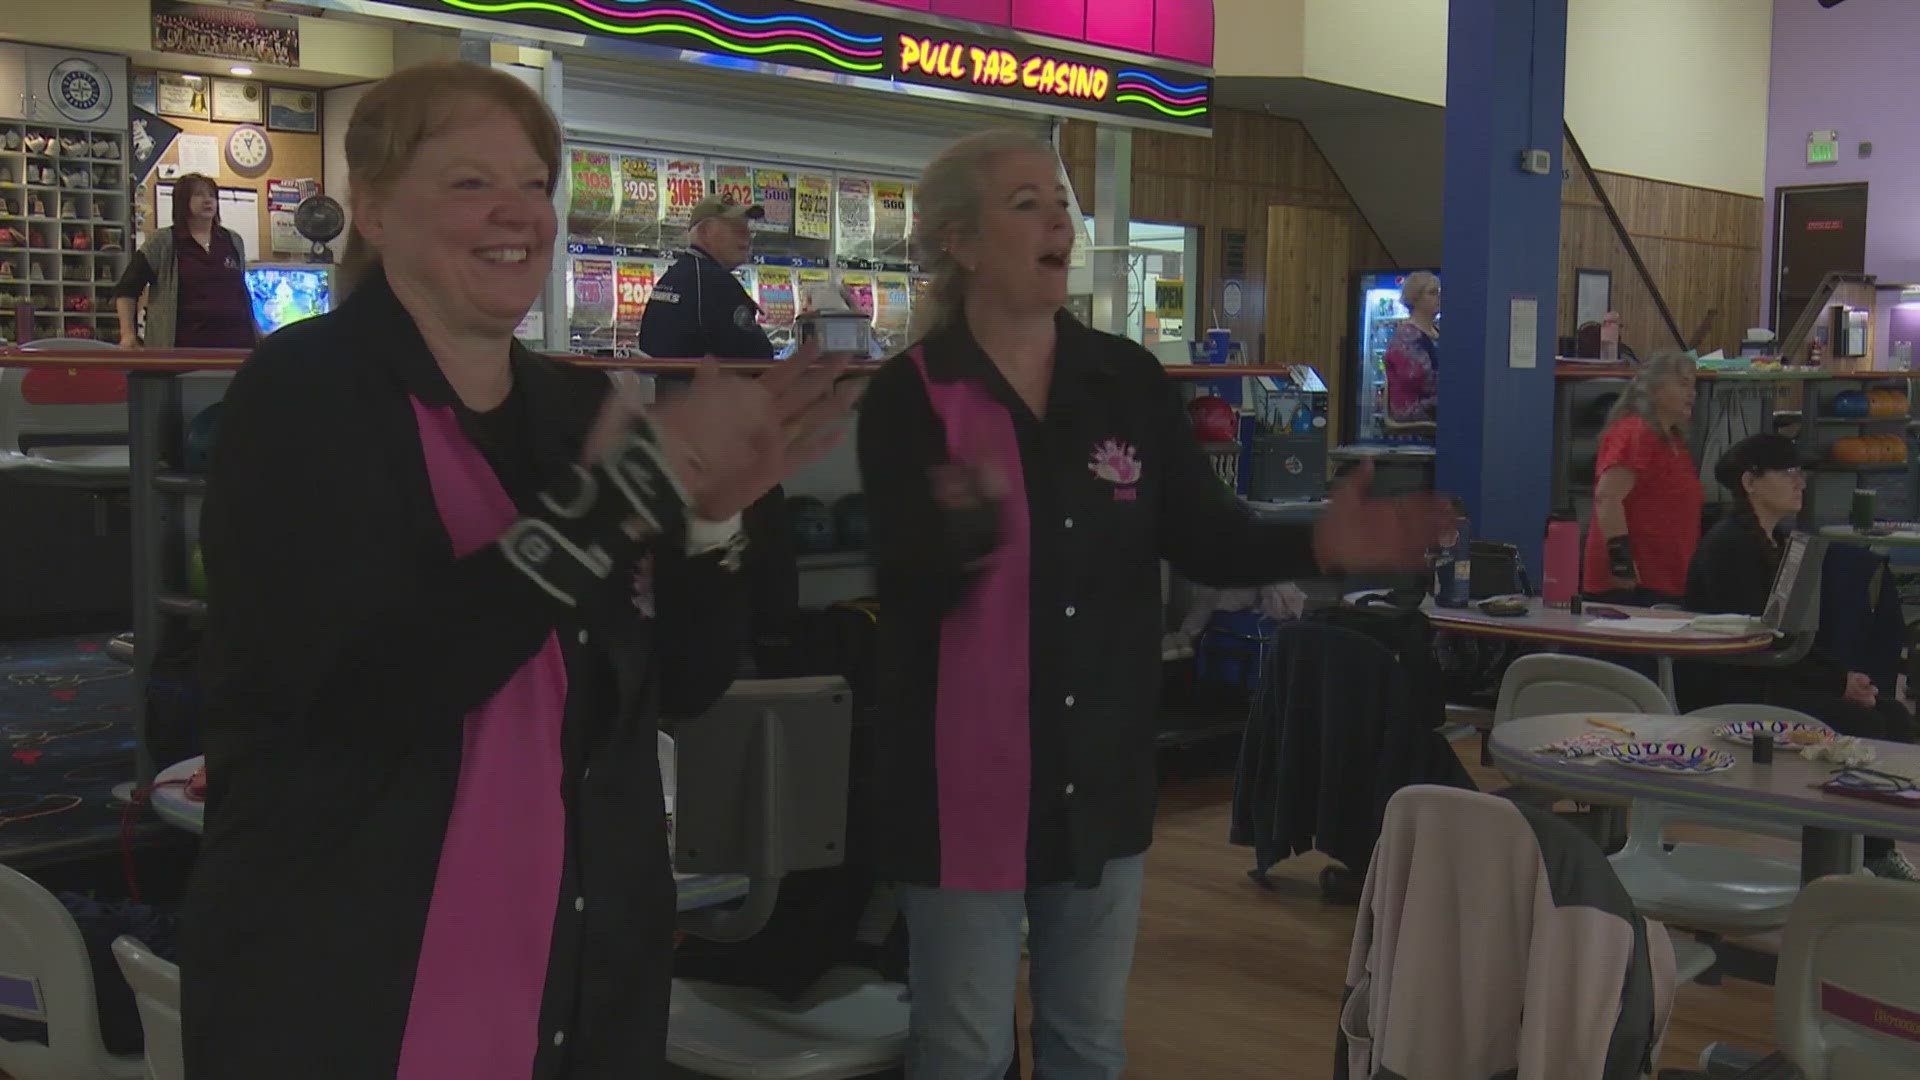 Multiple women in the "Tuesday Wonders" bowling league have been together for more than 40 years, creating a network of support through life.